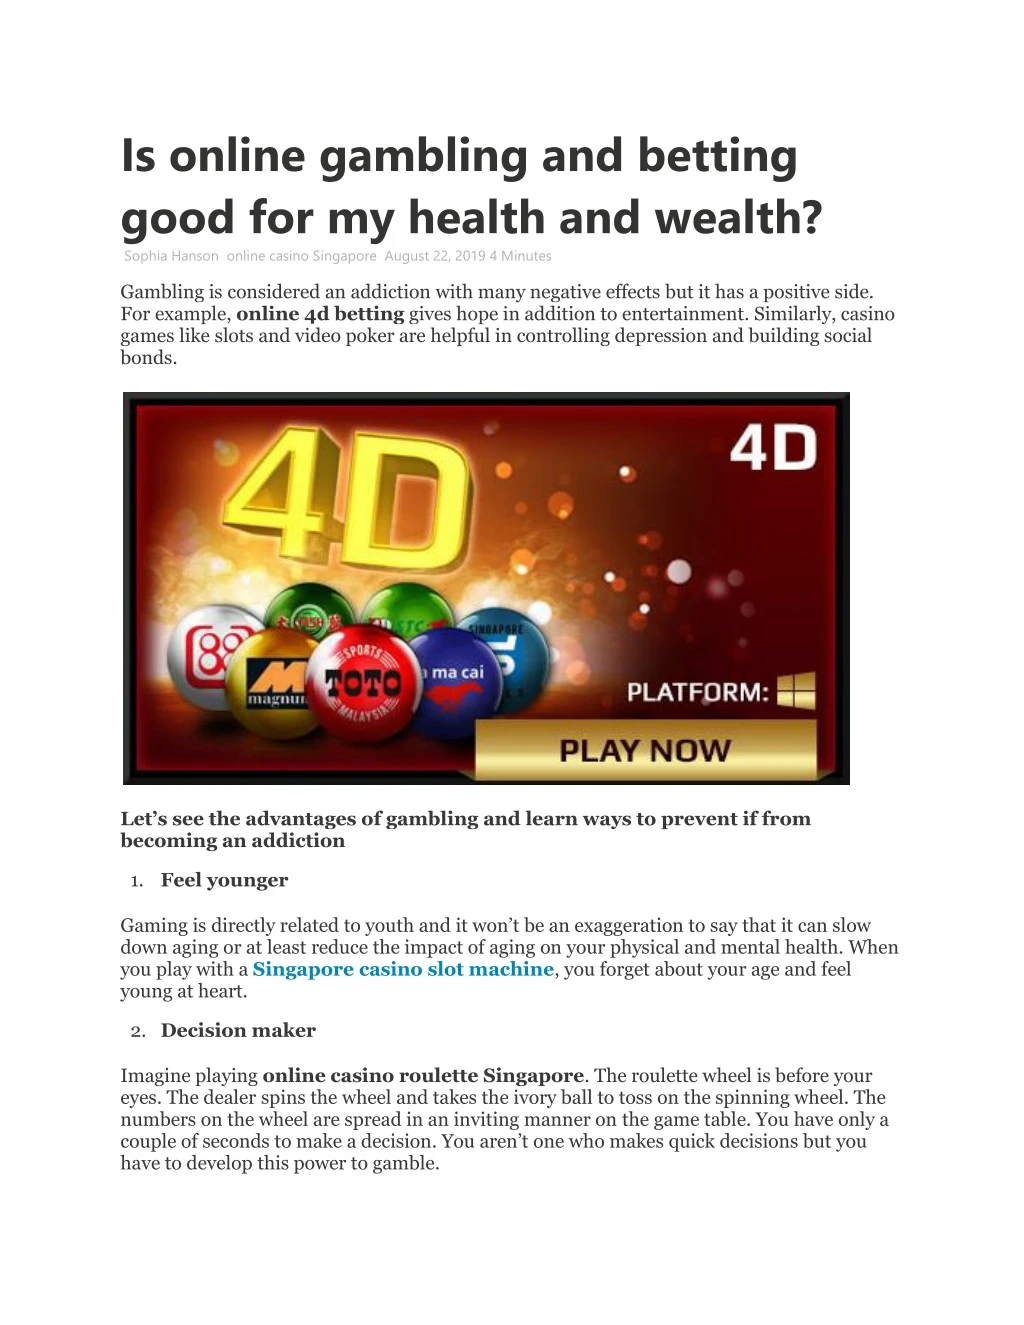 is online gambling and betting good for my health